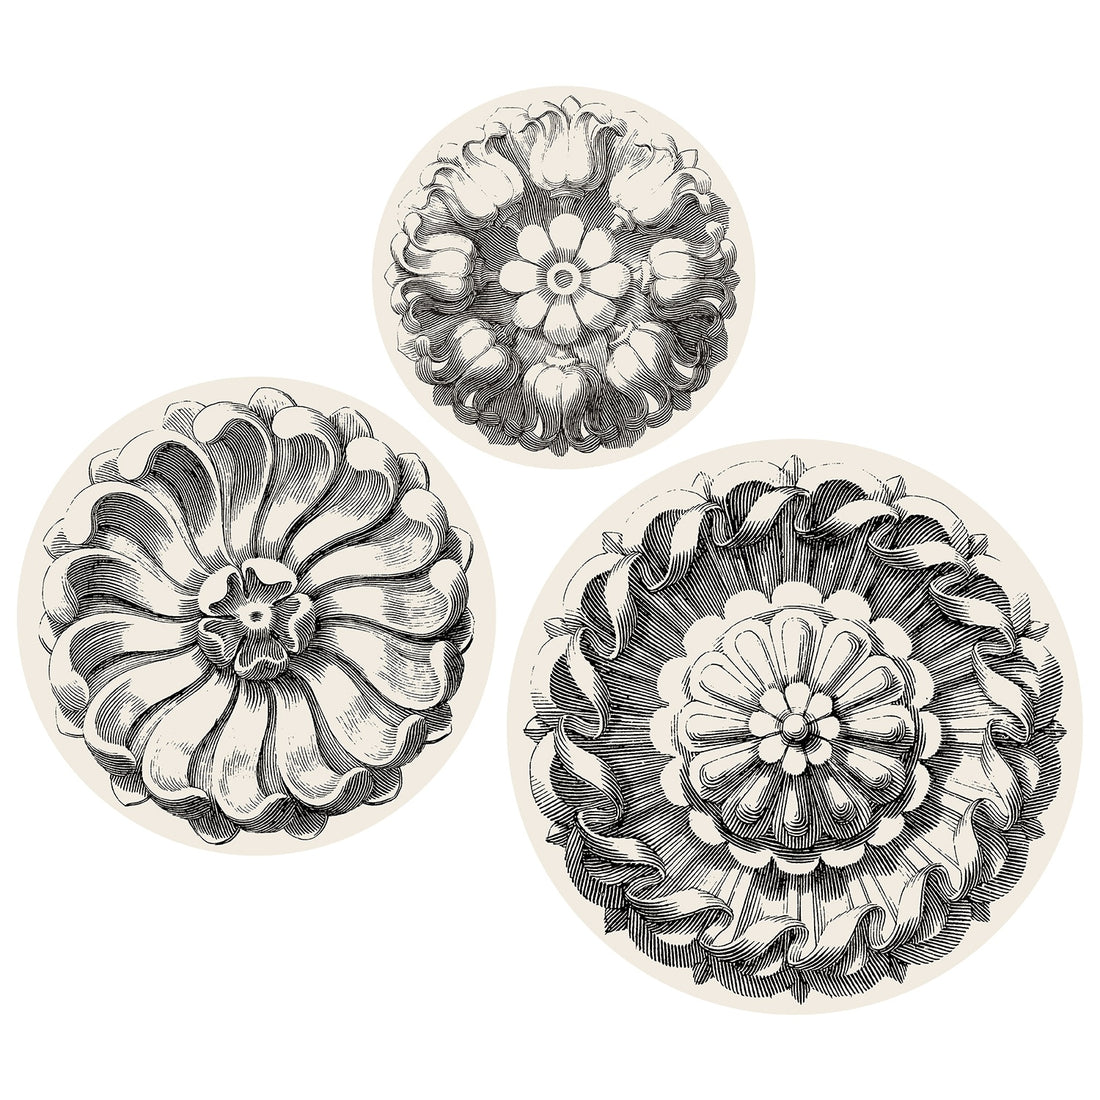 A black and white drawing of a flower on Hester &amp; Cook Rosette Serving Papers with a plain white background.